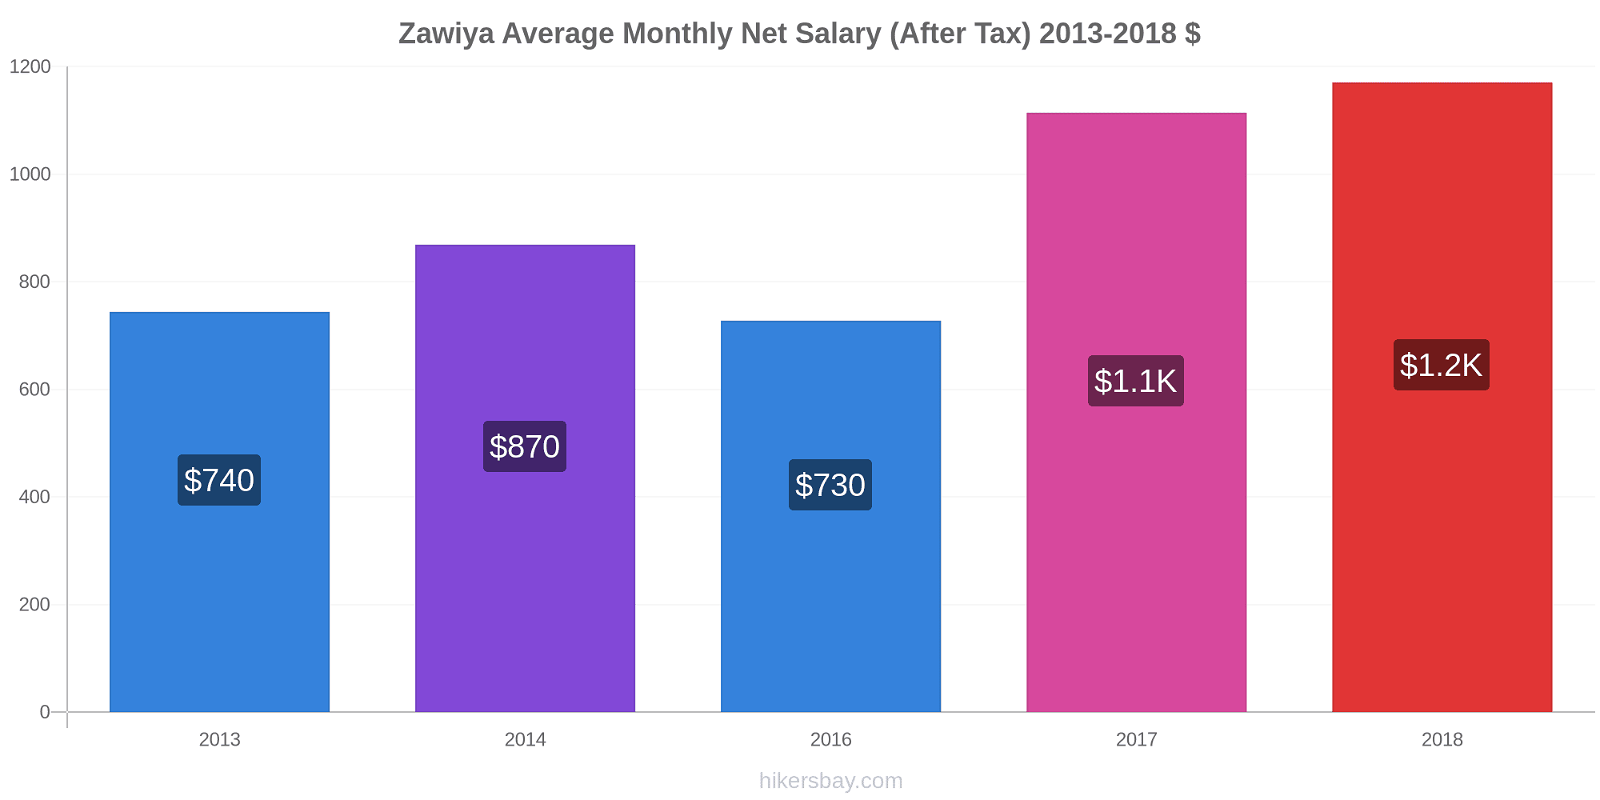 Zawiya price changes Average Monthly Net Salary (After Tax) hikersbay.com